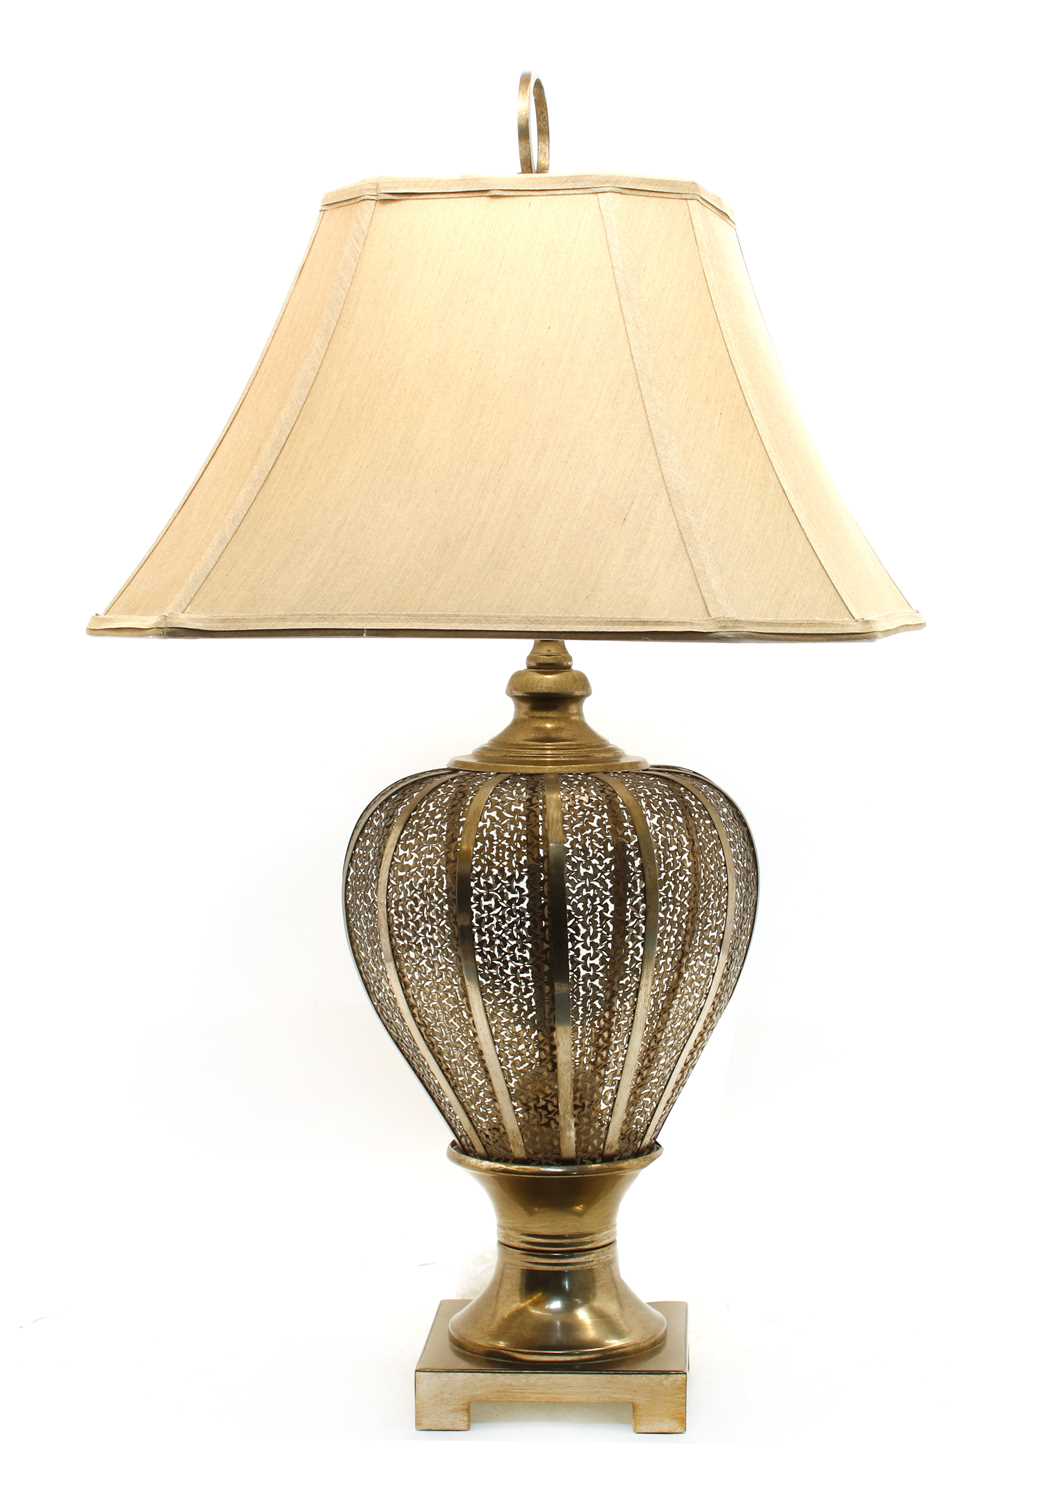 Lot 203 - A Middle Eastern style table lamp